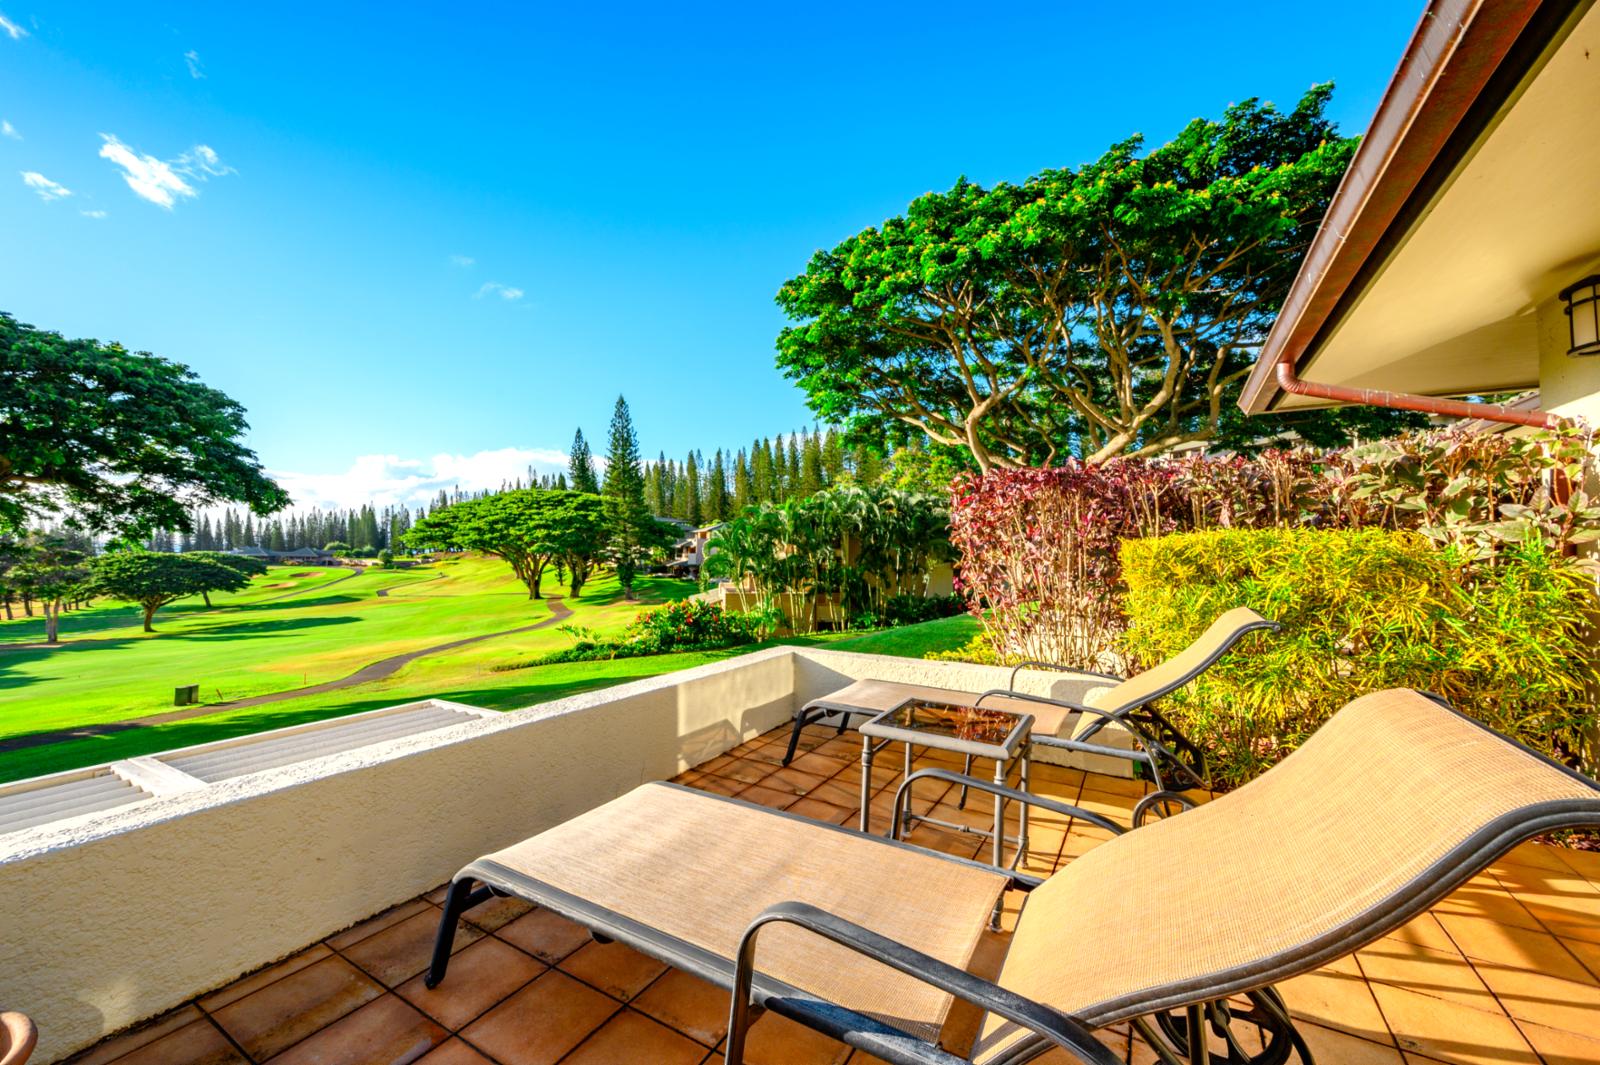 Outstanding Views from Lanai